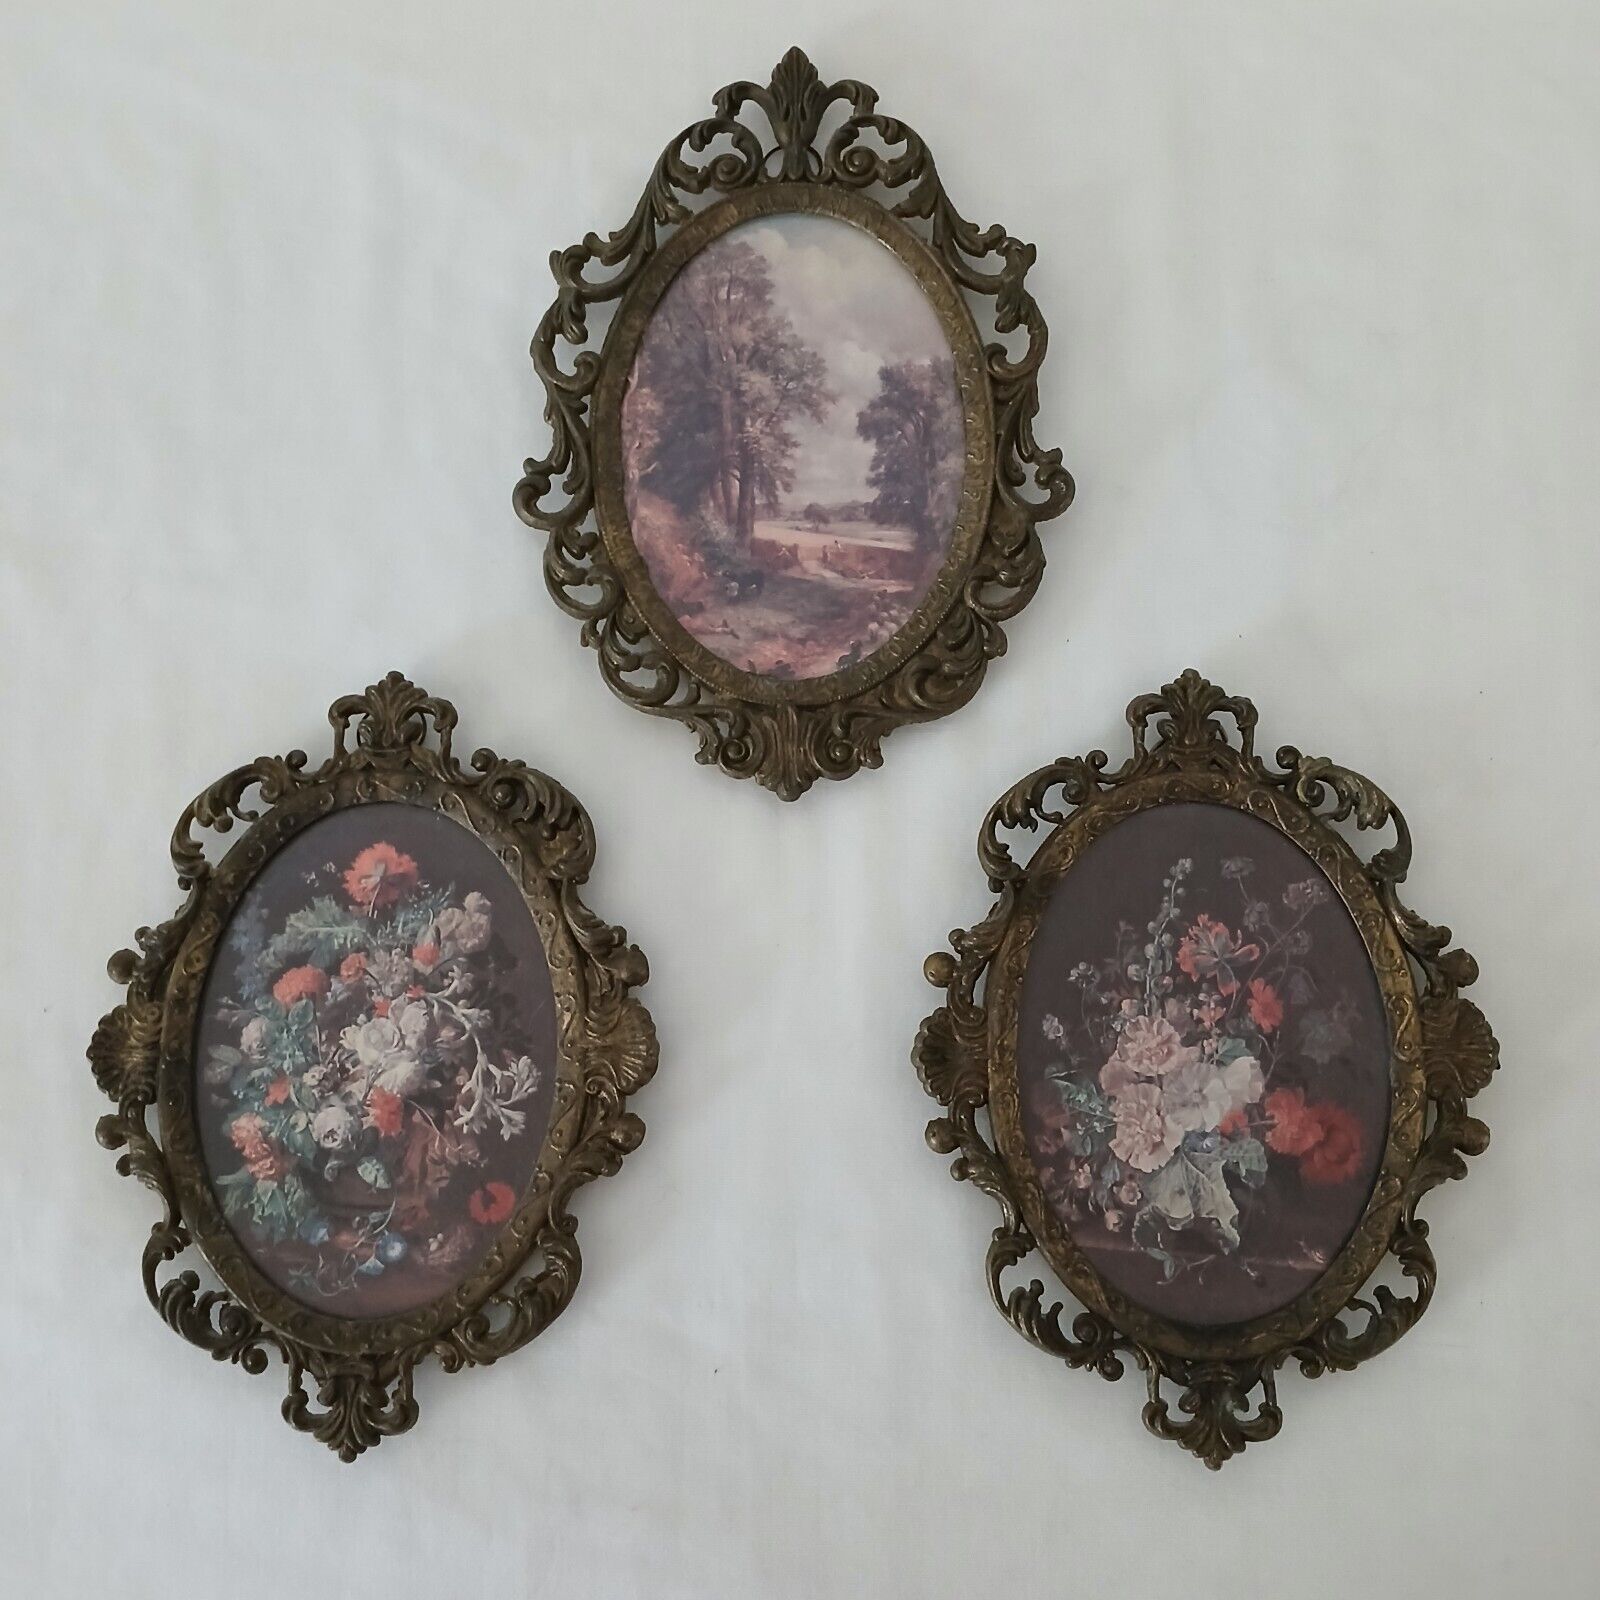 Vintage Ornate Picture Frame Wall Hangings 5”x7” Made Italy Lot Of 3